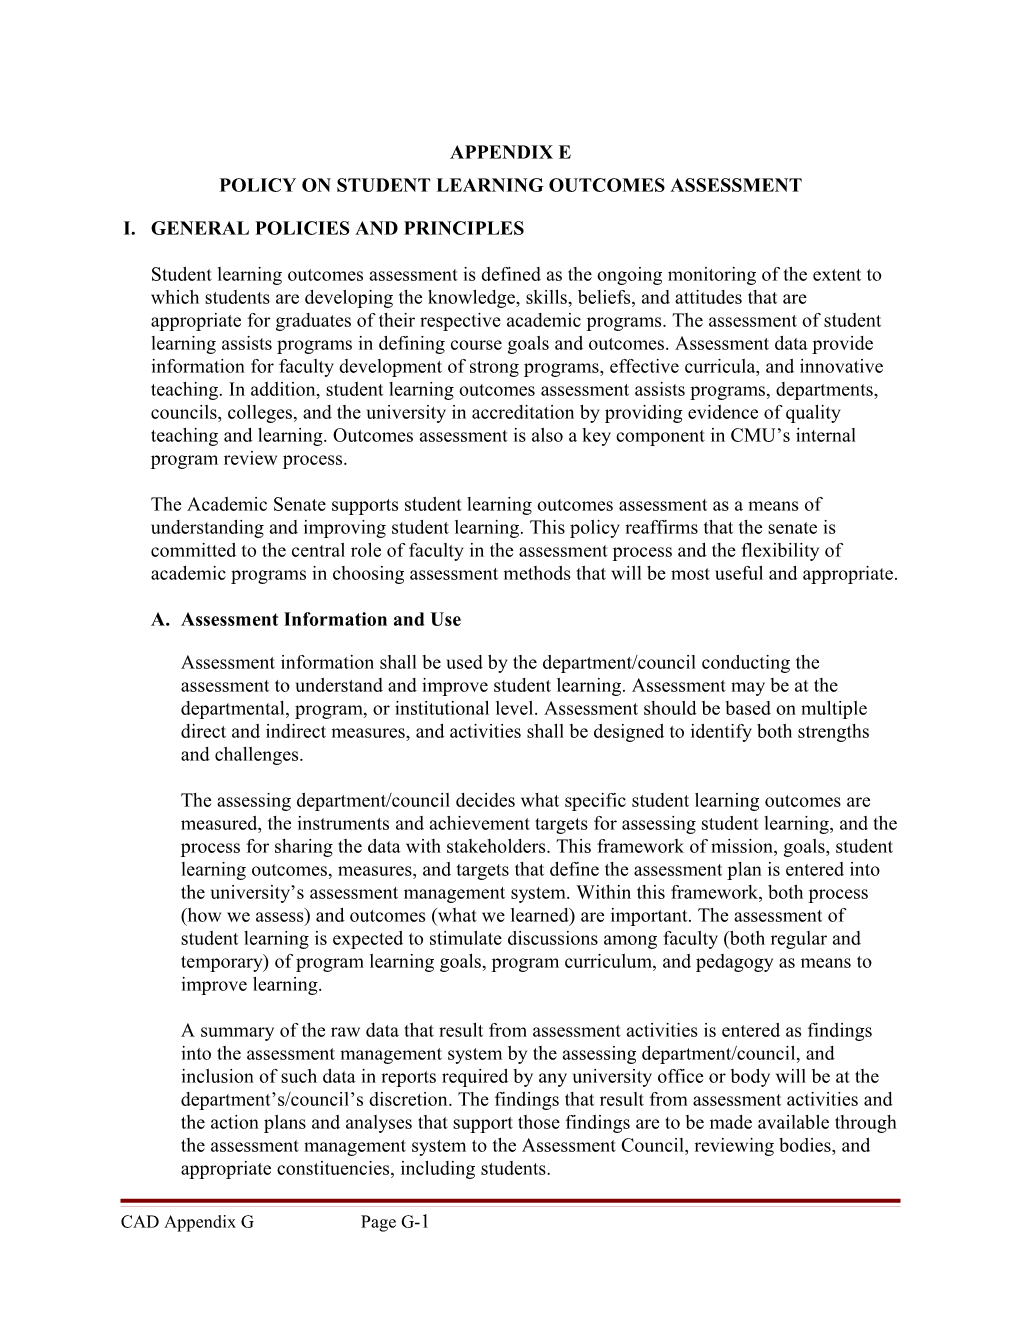 Student Learning Outcomes Policy 4-21-15 Approved by Senate